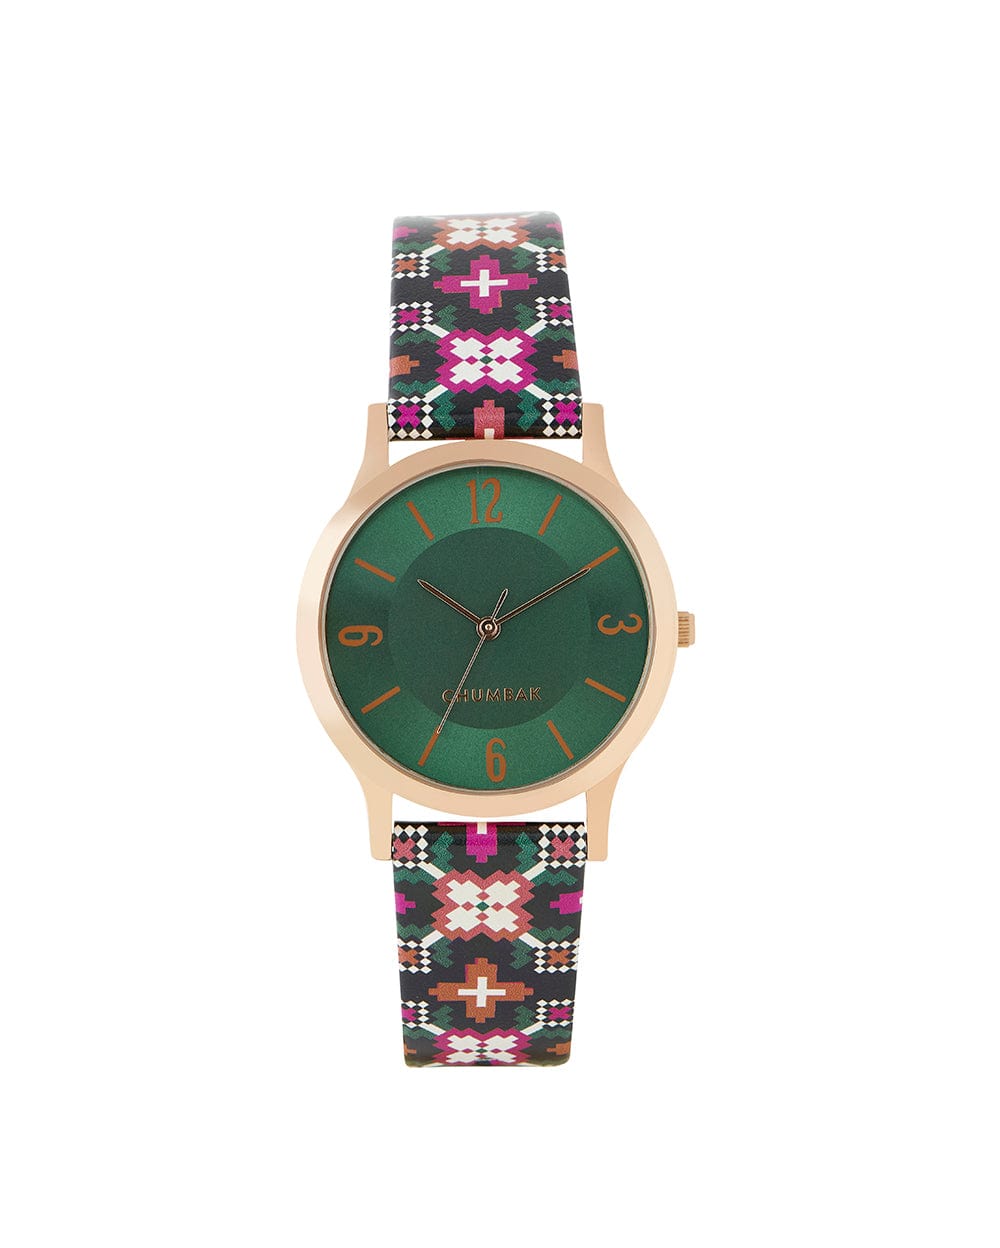 TEAL by Chumbak Lets Get Lost Wrist Watch - Black